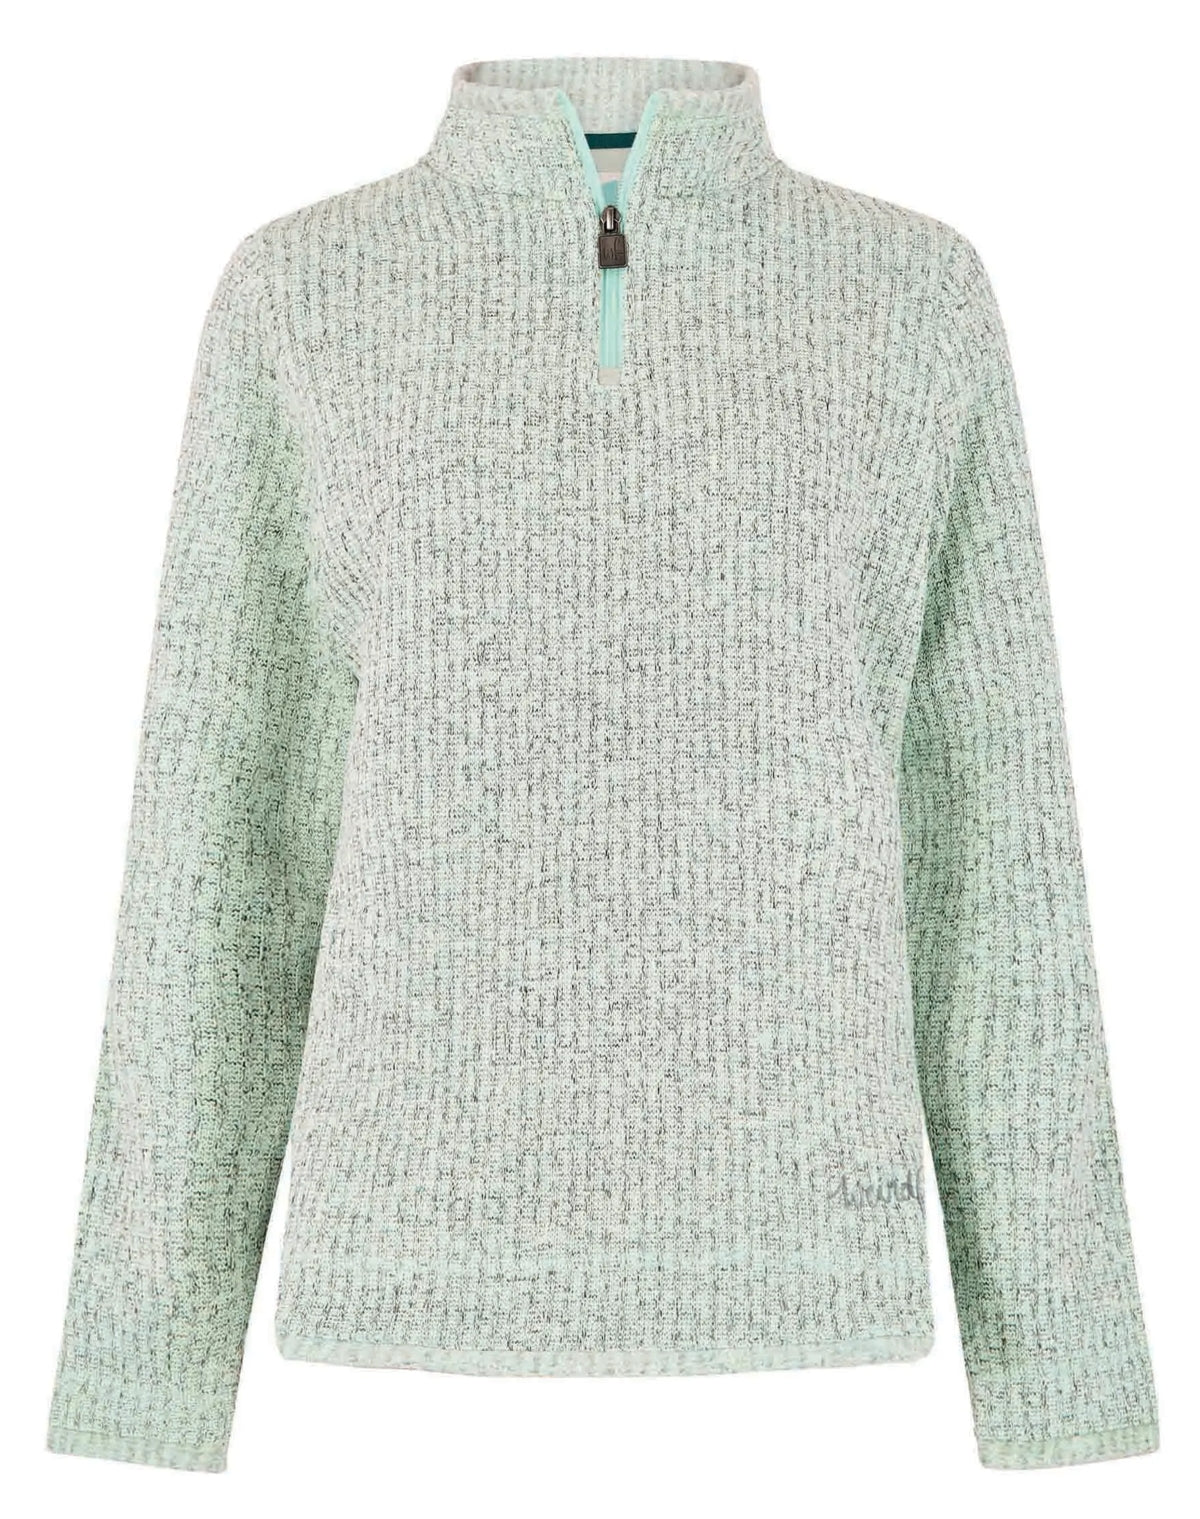 The Omila women's quarter zip fleece from Weird Fish in Mint Green, made from a 100% recycled polyester ribbed knit fabric.